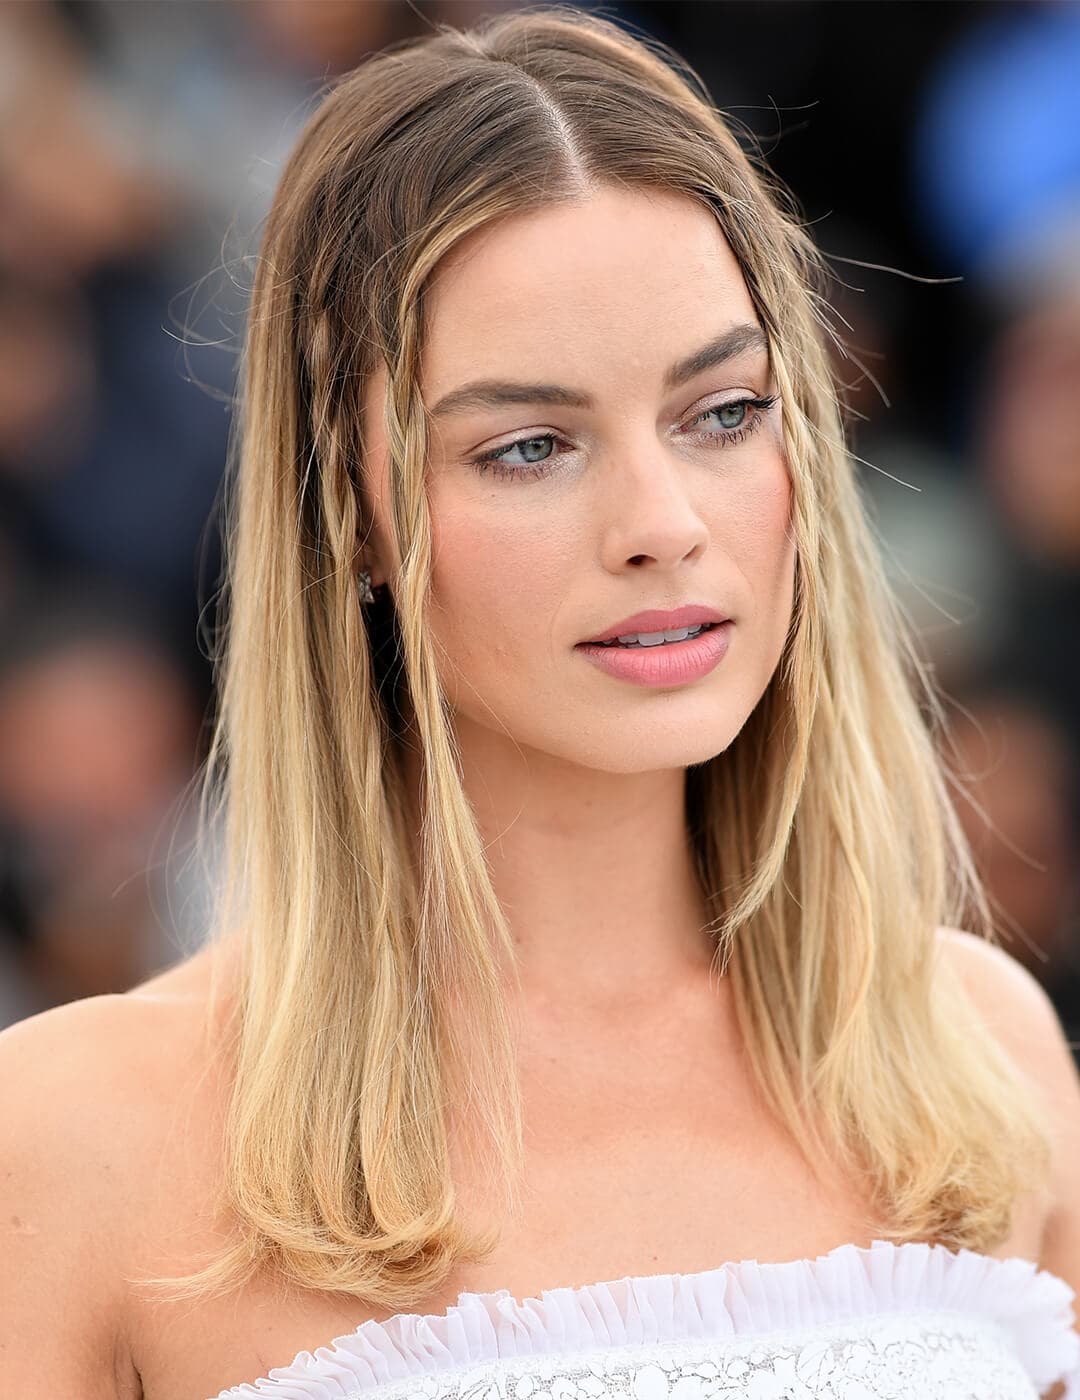 A photo of Margot Robbie with ombre blonde hair and with baby braids wearing a frilly white dress